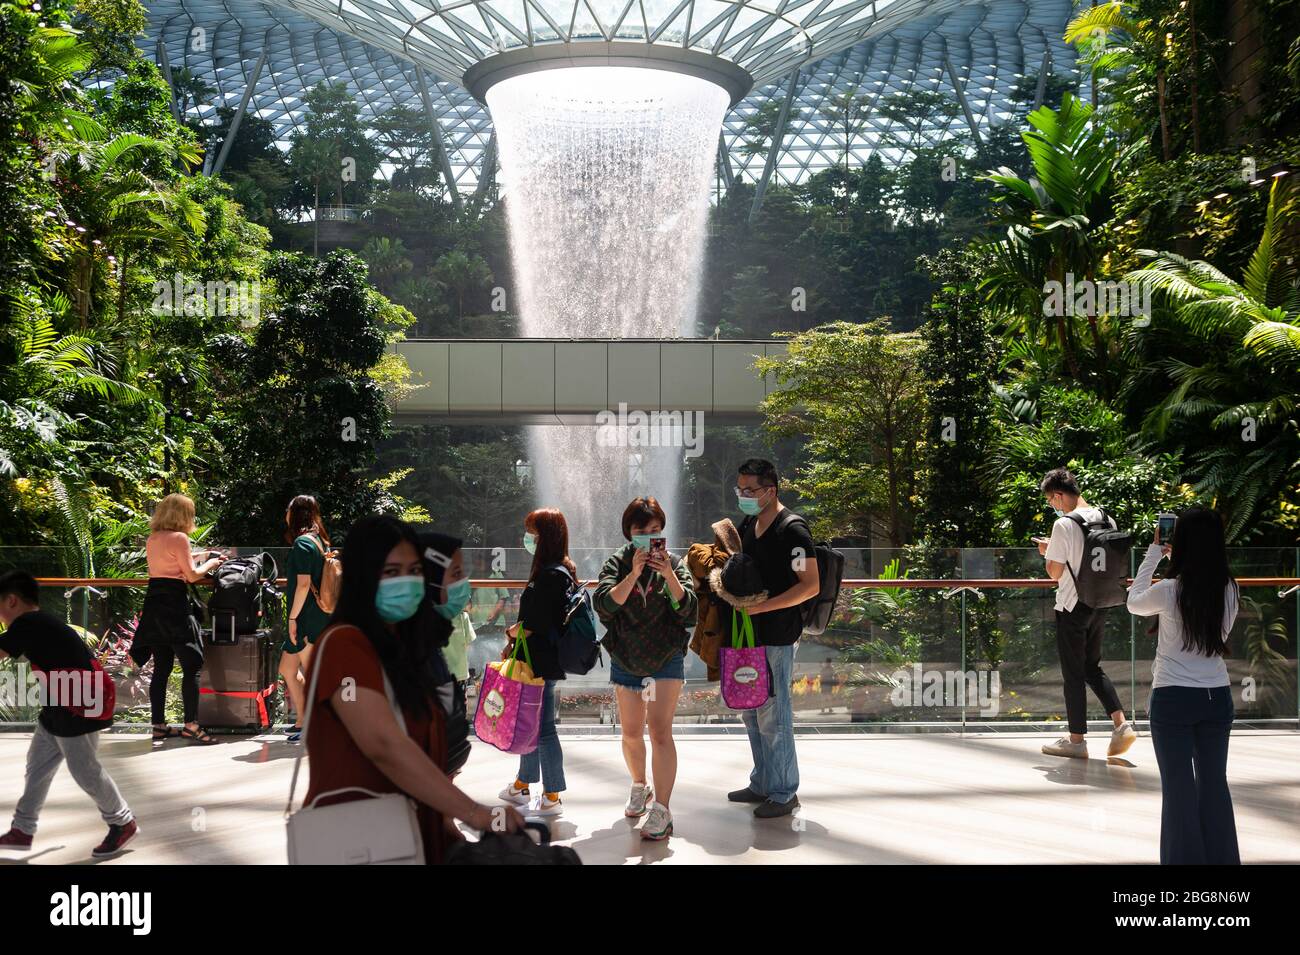 31.01.2020, Singapore, Republic of Singapore, Asia - People are seen in front of the vortex indoor waterfall at Changi Airport's new Jewel Terminal. Stock Photo